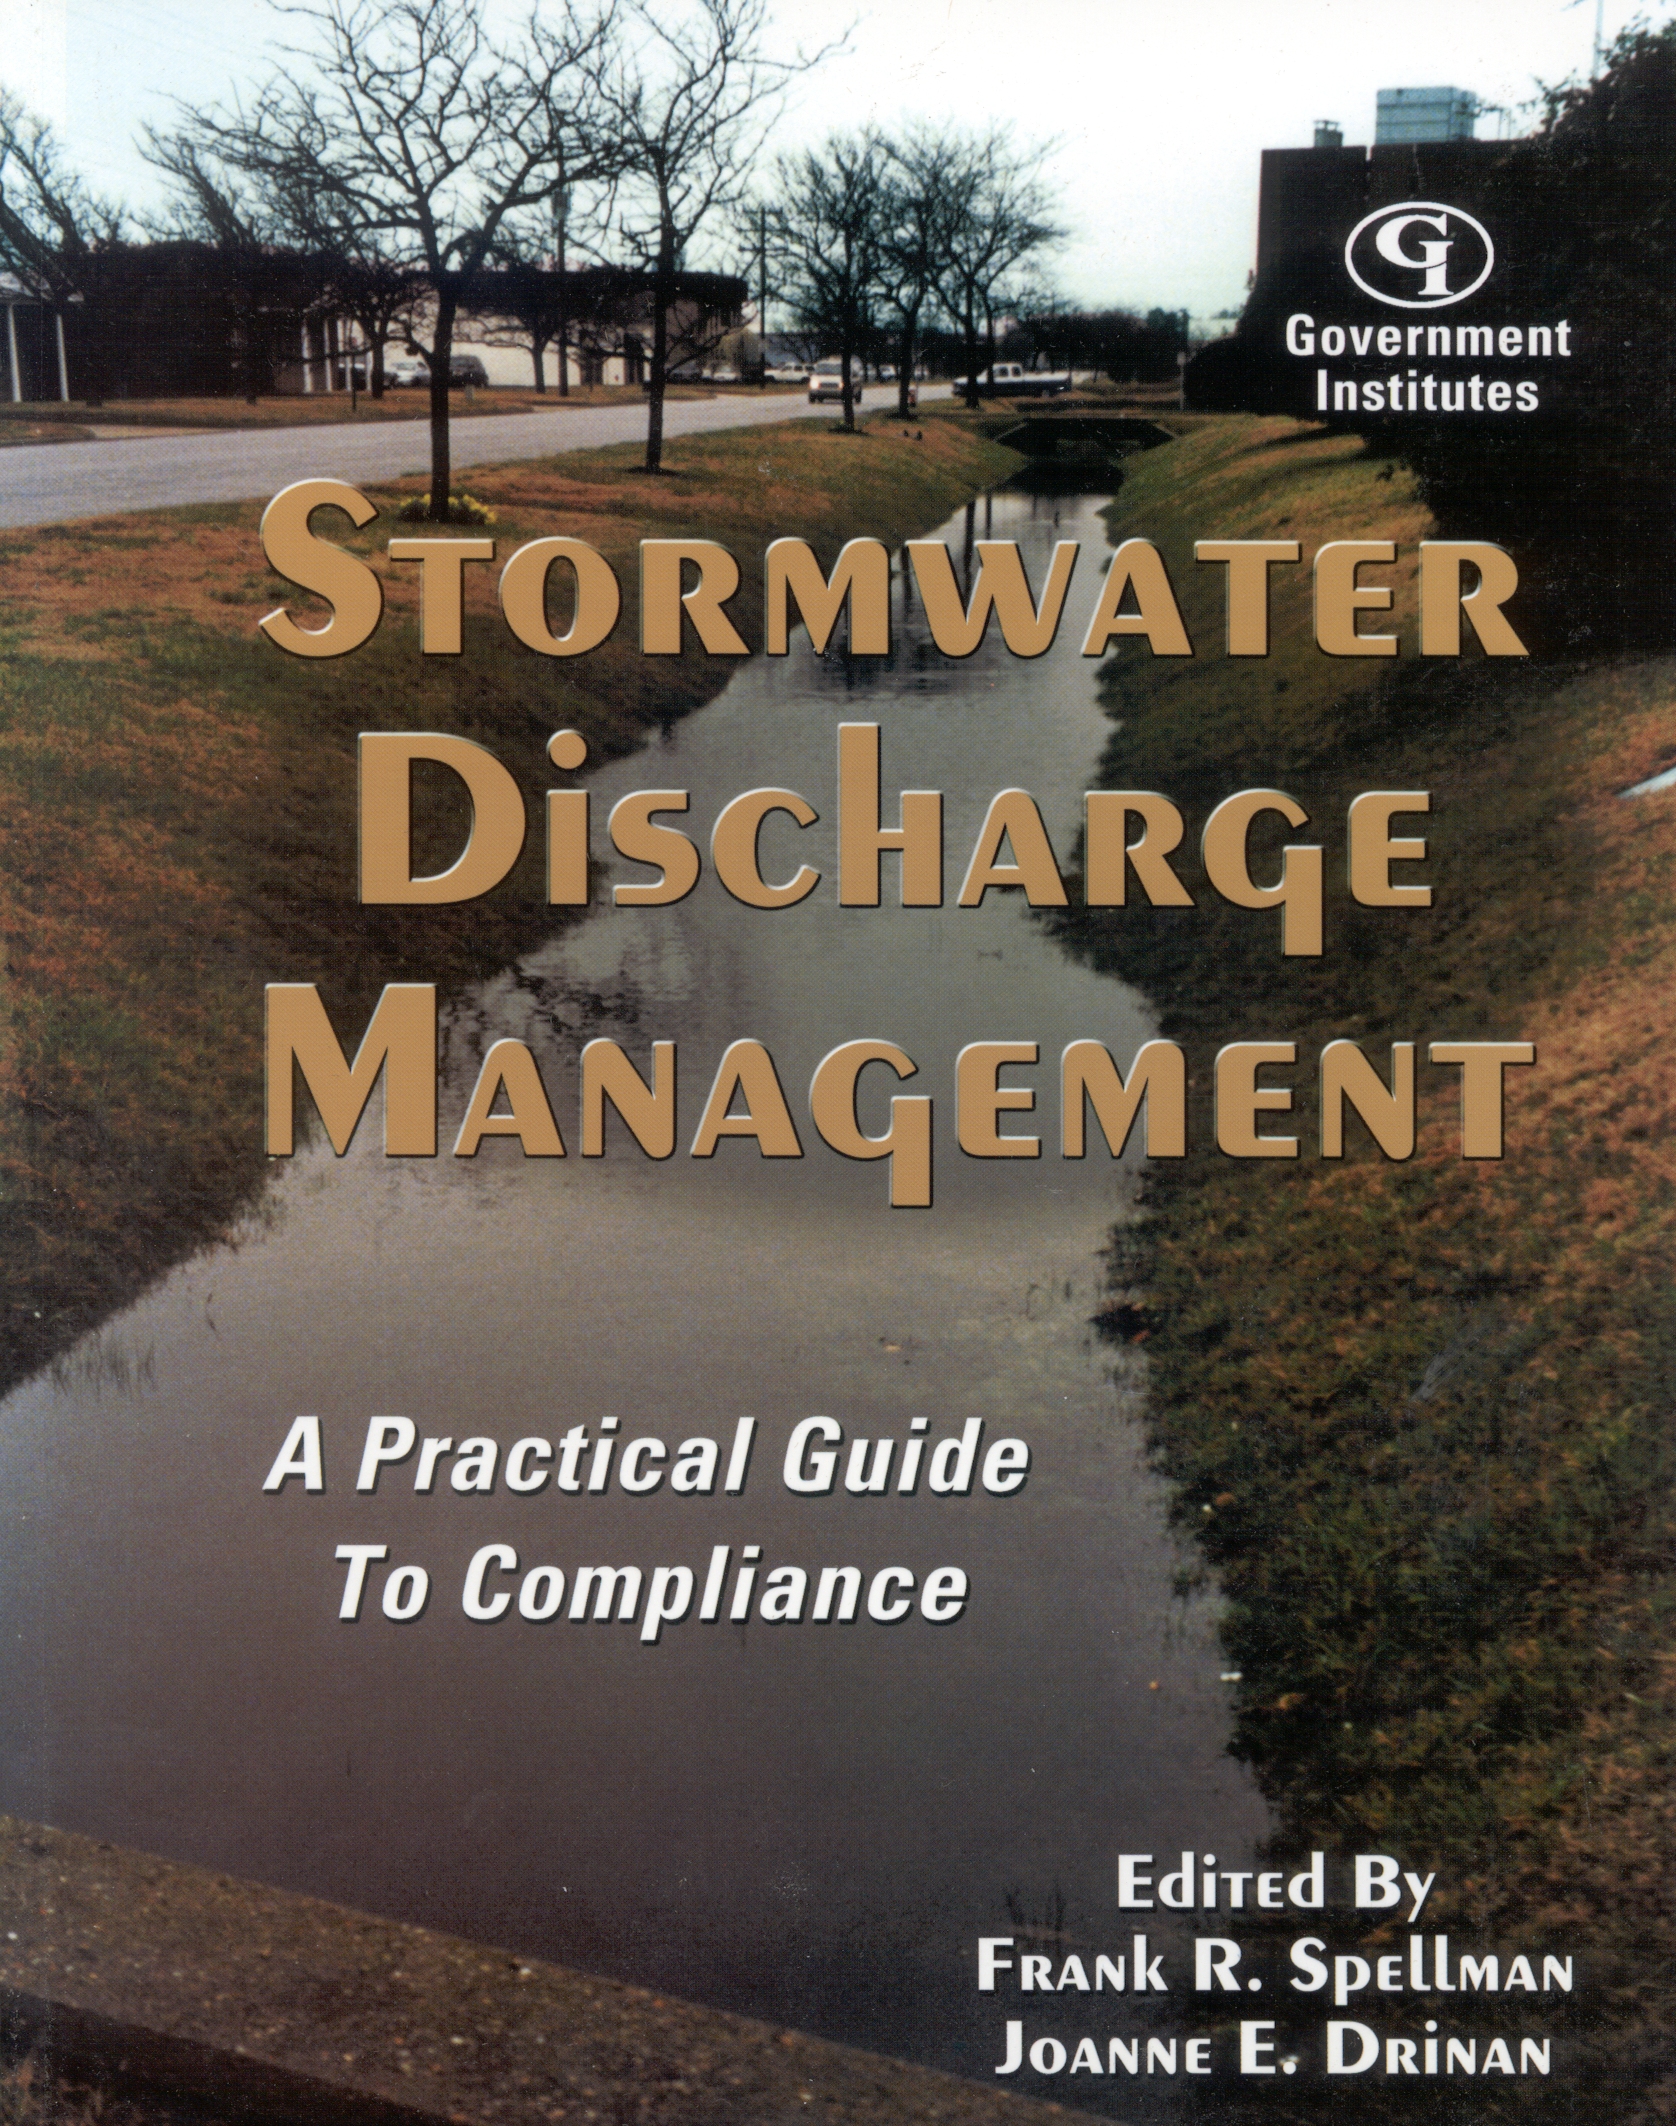 Stormwater Discharge Management: A Practical Guide to Compliance